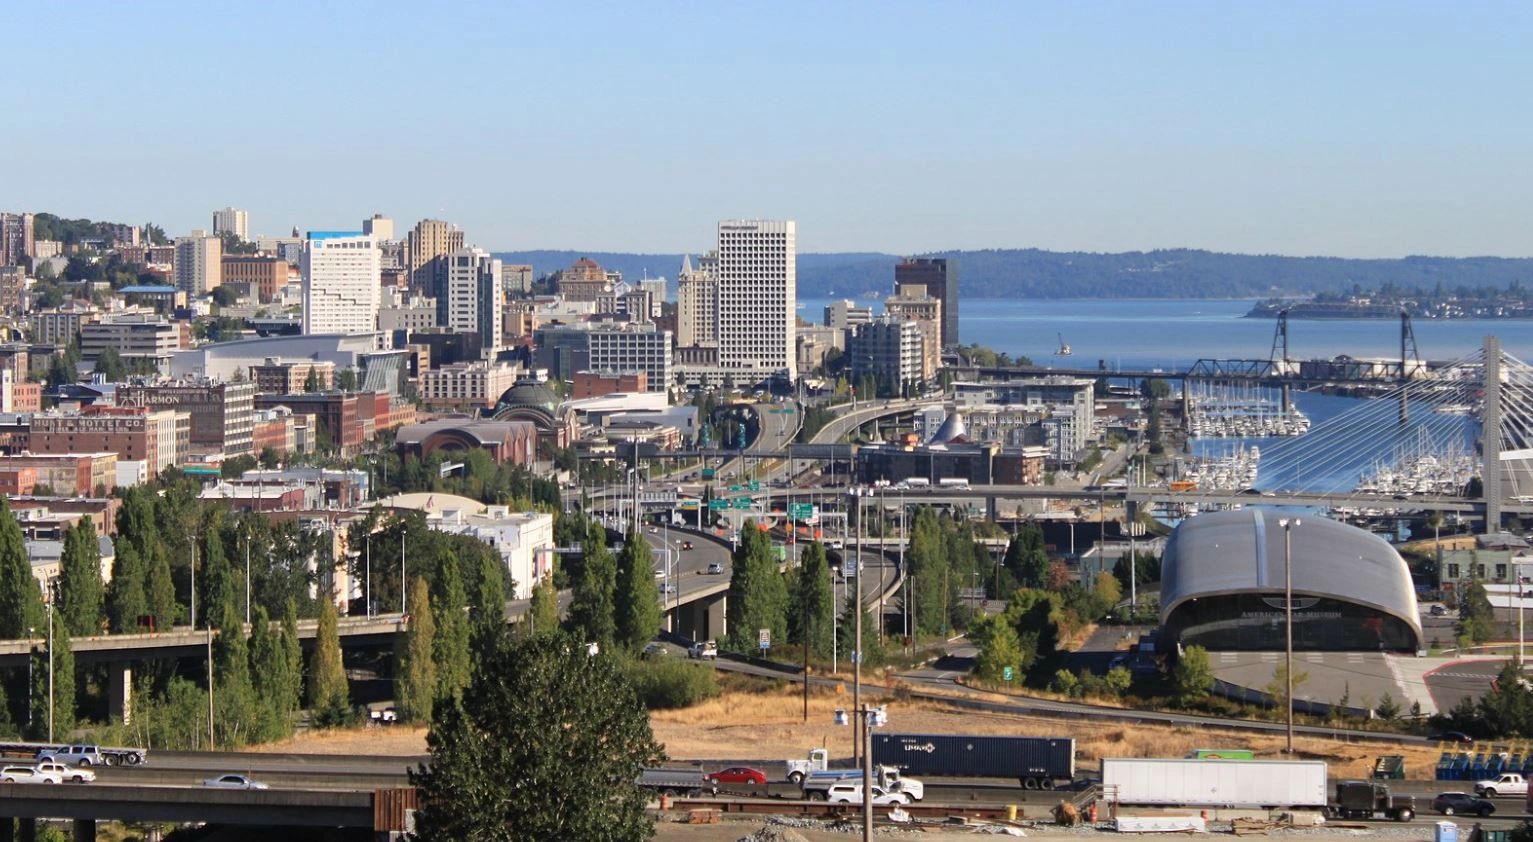 An image of downtown Tacoma from the view looking out from I5 towards the water of the Puget Sound.